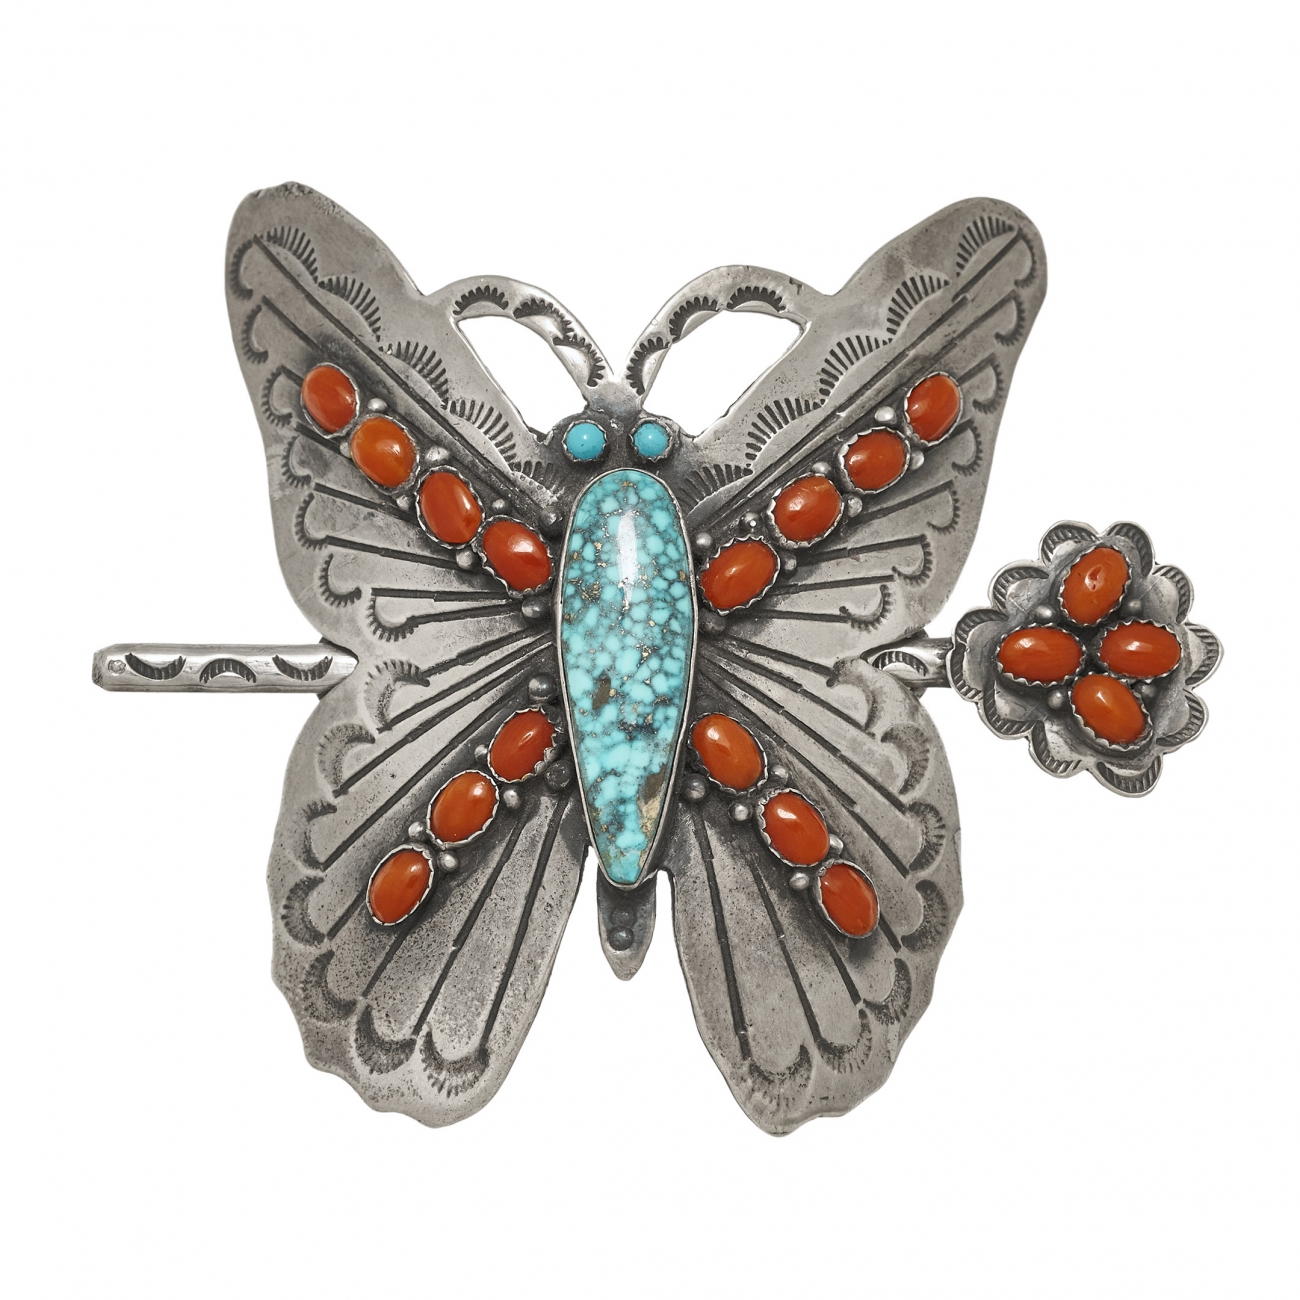 BAR09 butterfly hair clip turquoise, coral and silver - Harpo Paris